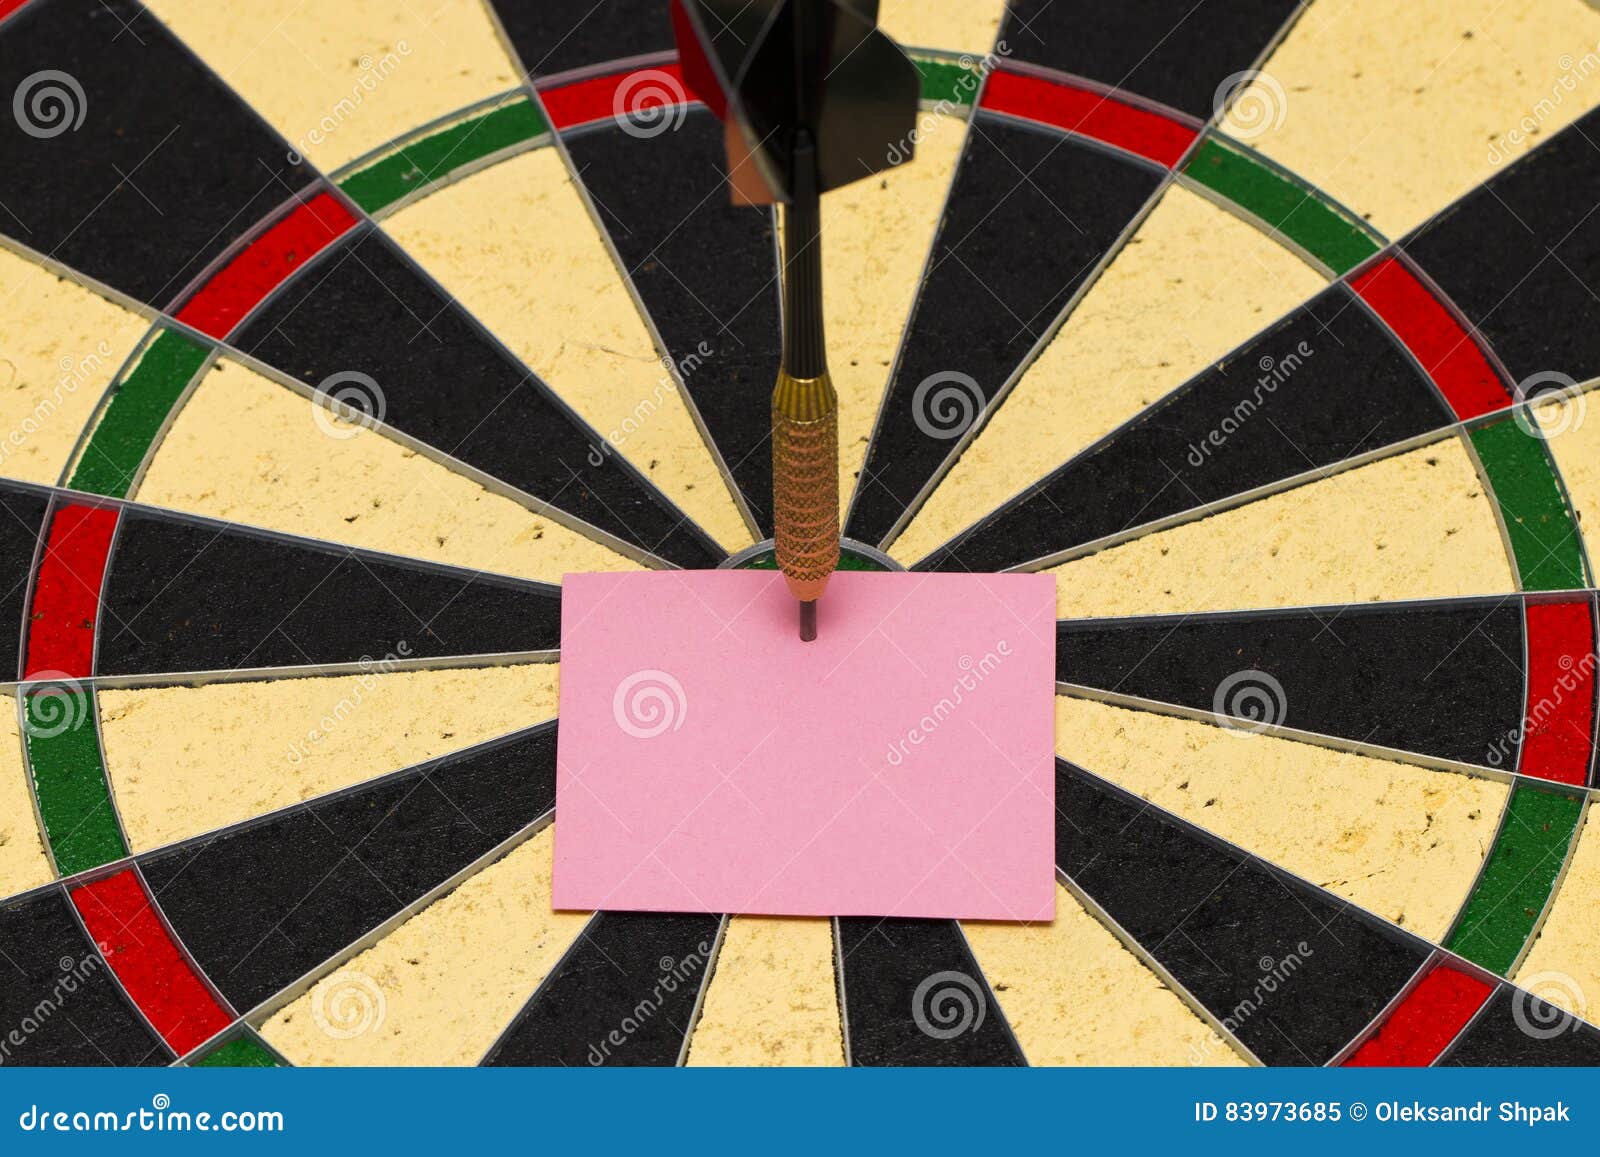 darts with dart which was pinned a sheet of paper for labels